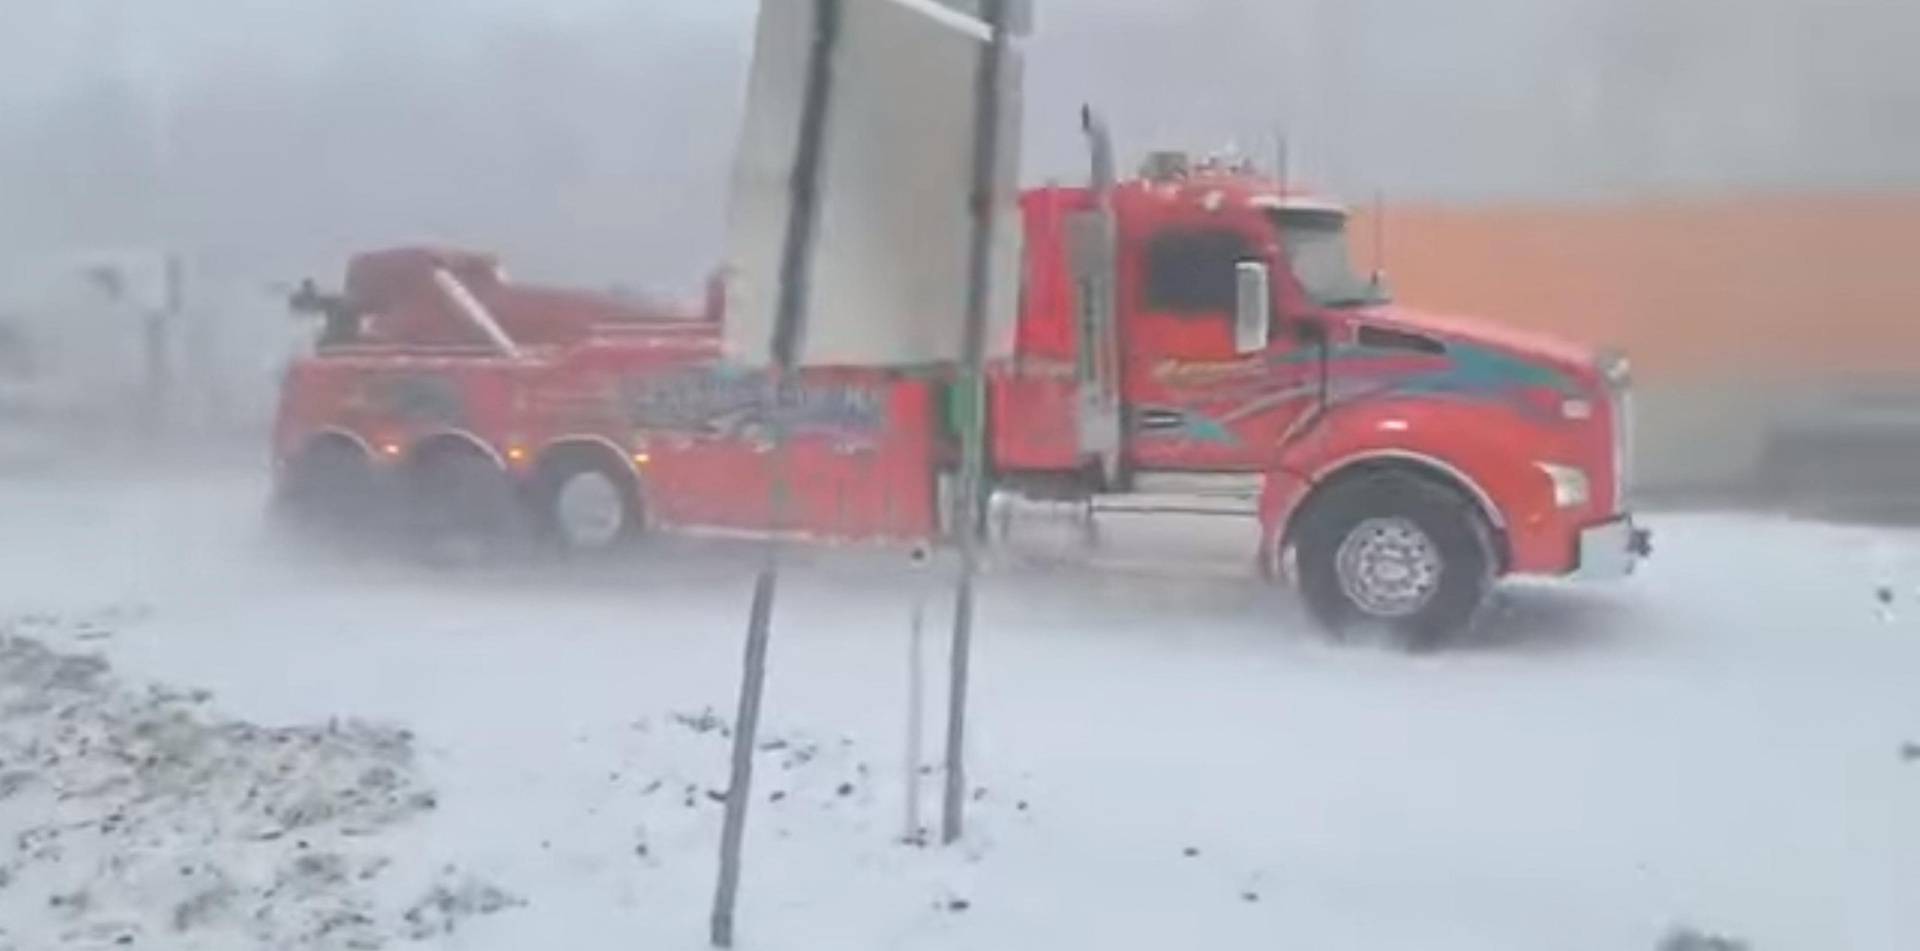 Fiery pileup on Interstate 81 North near 114–116 mile marker in Schuylkill County, Pennsylvania